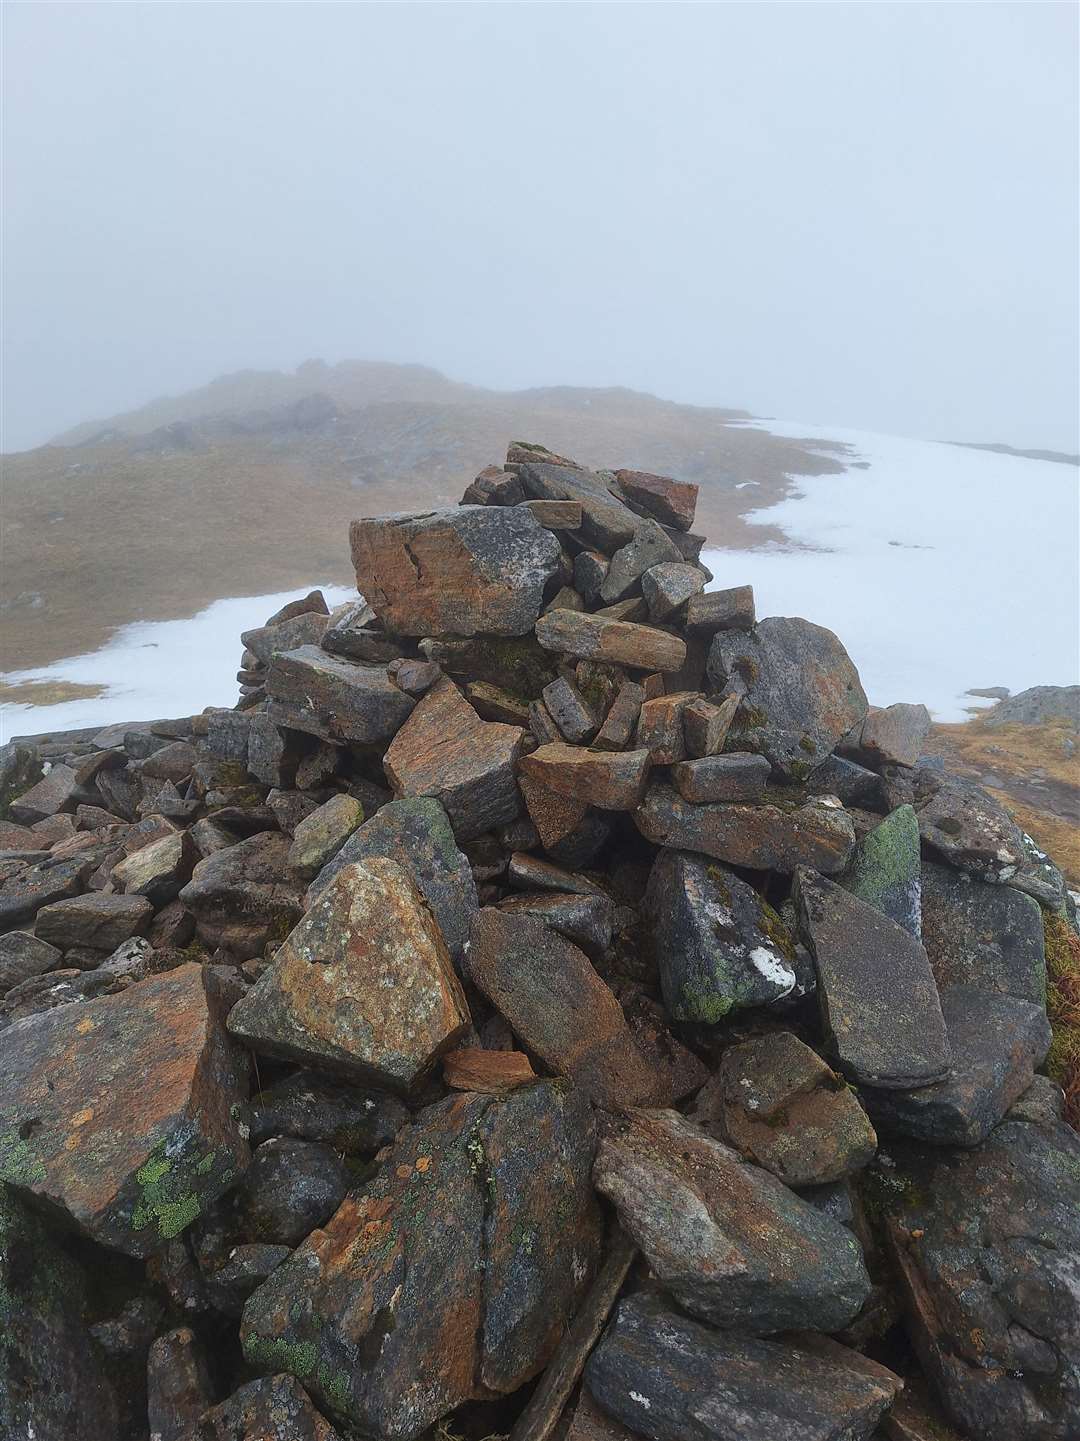 Looking west from the summit cairn on Lurg Mhor.